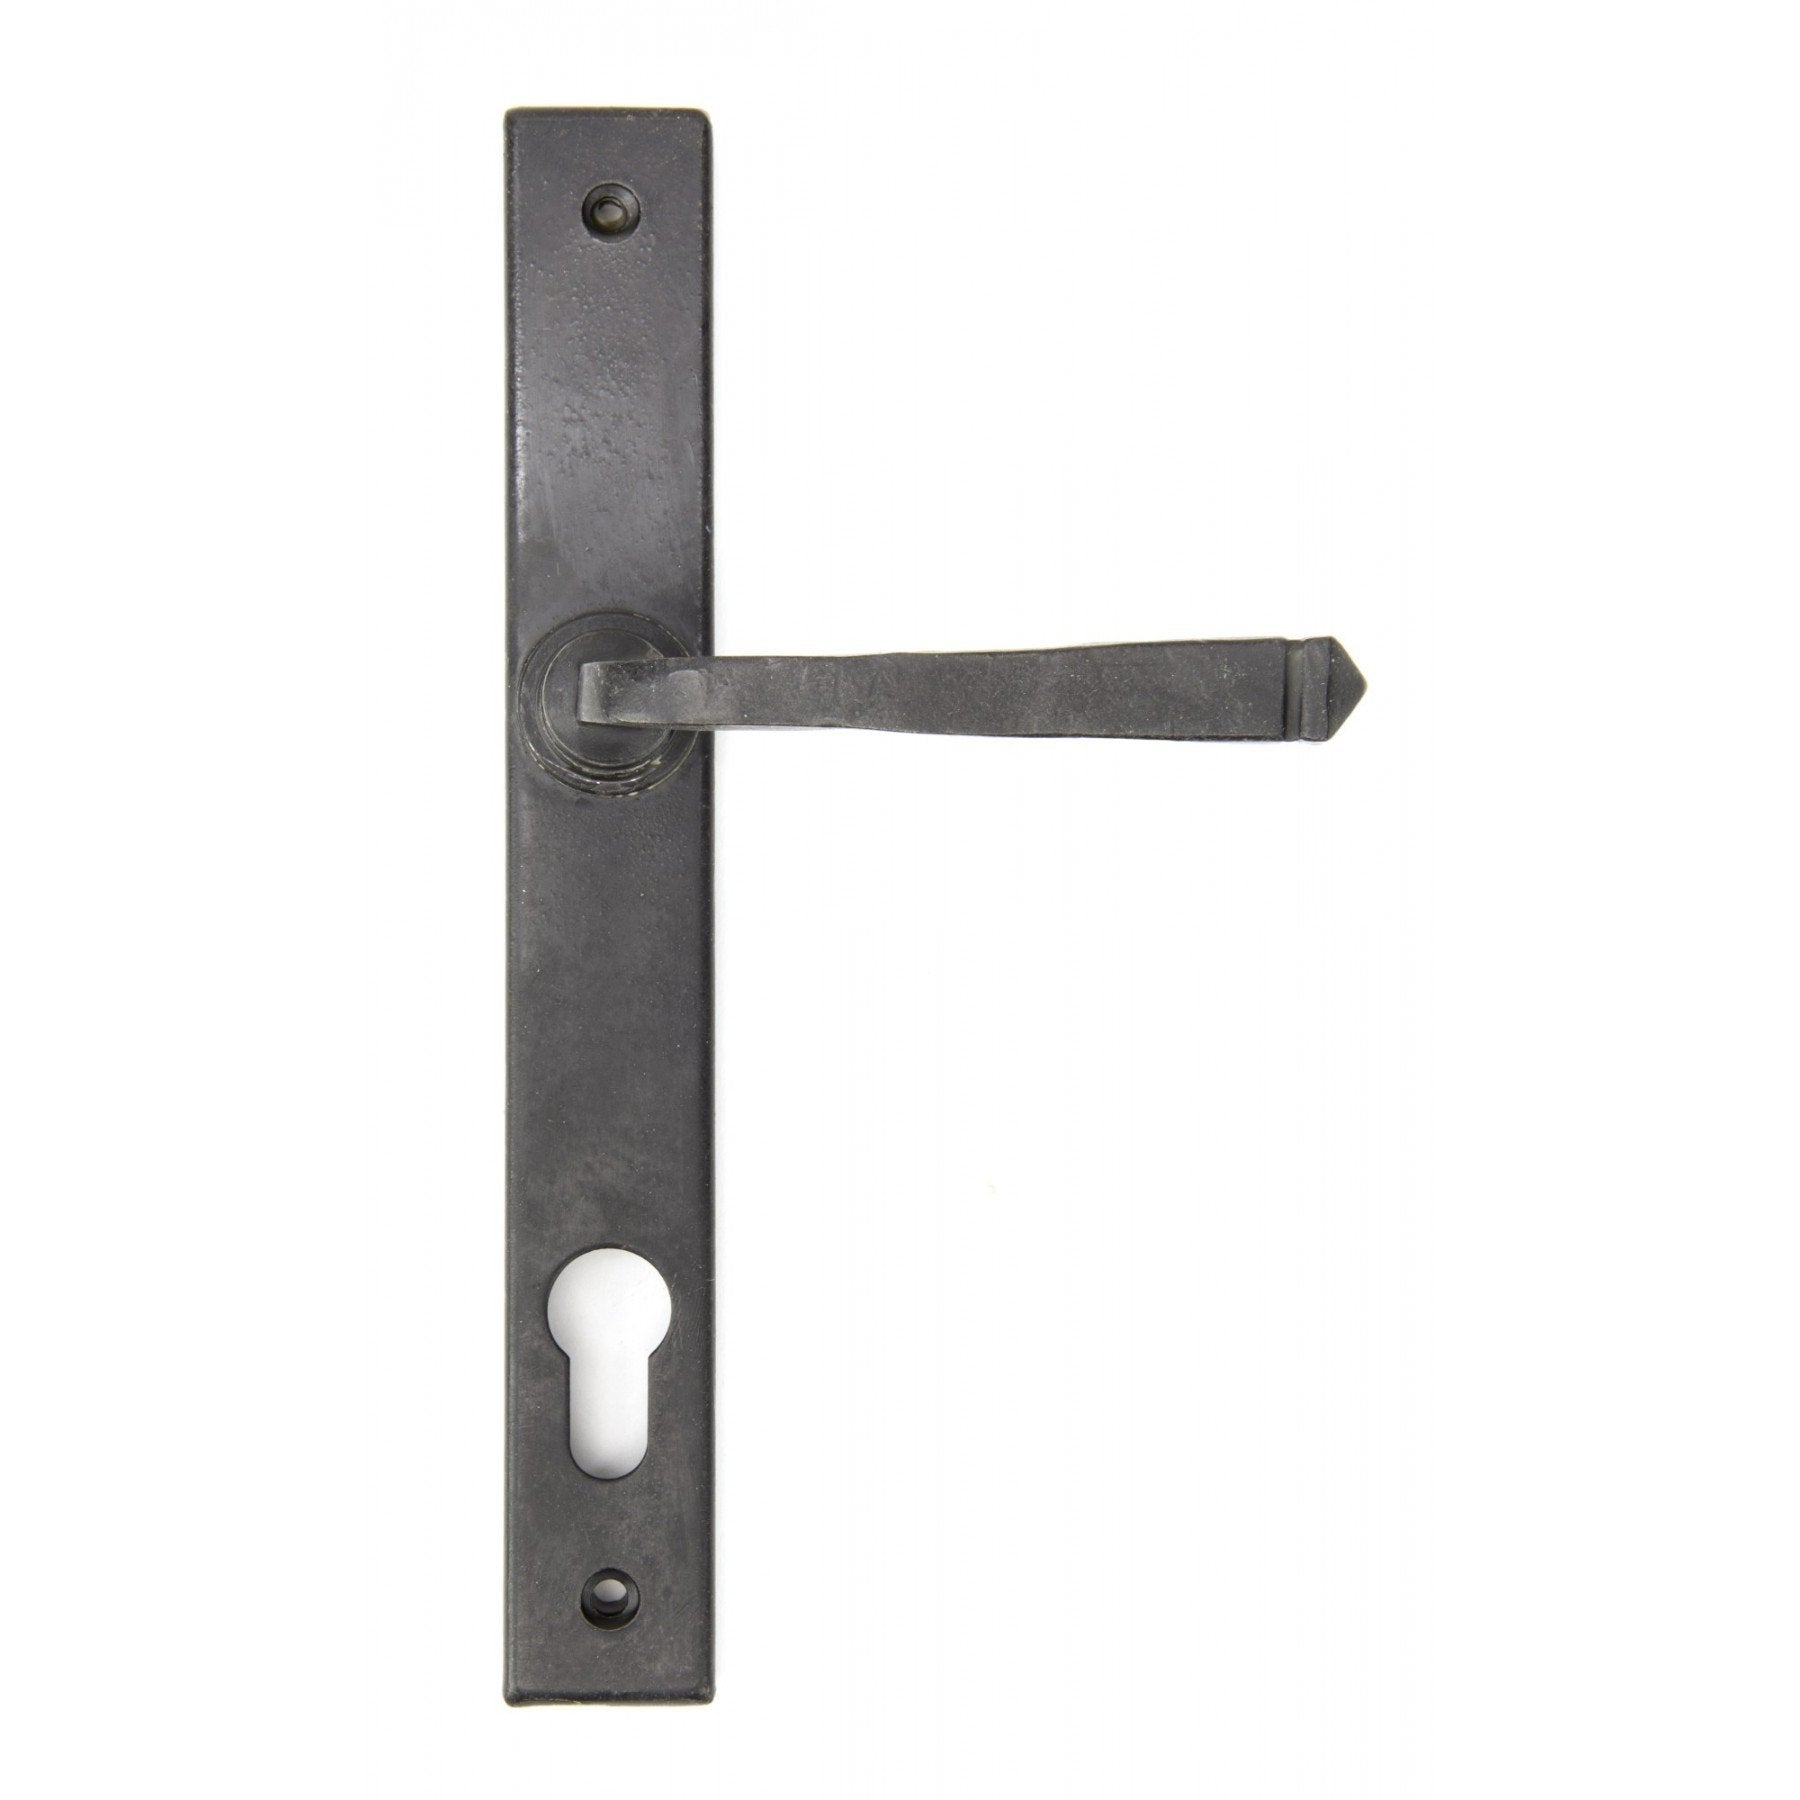 From the Anvil External Beeswax Avon Slimline Lever Espag. Lock Set - No.42 Interiors